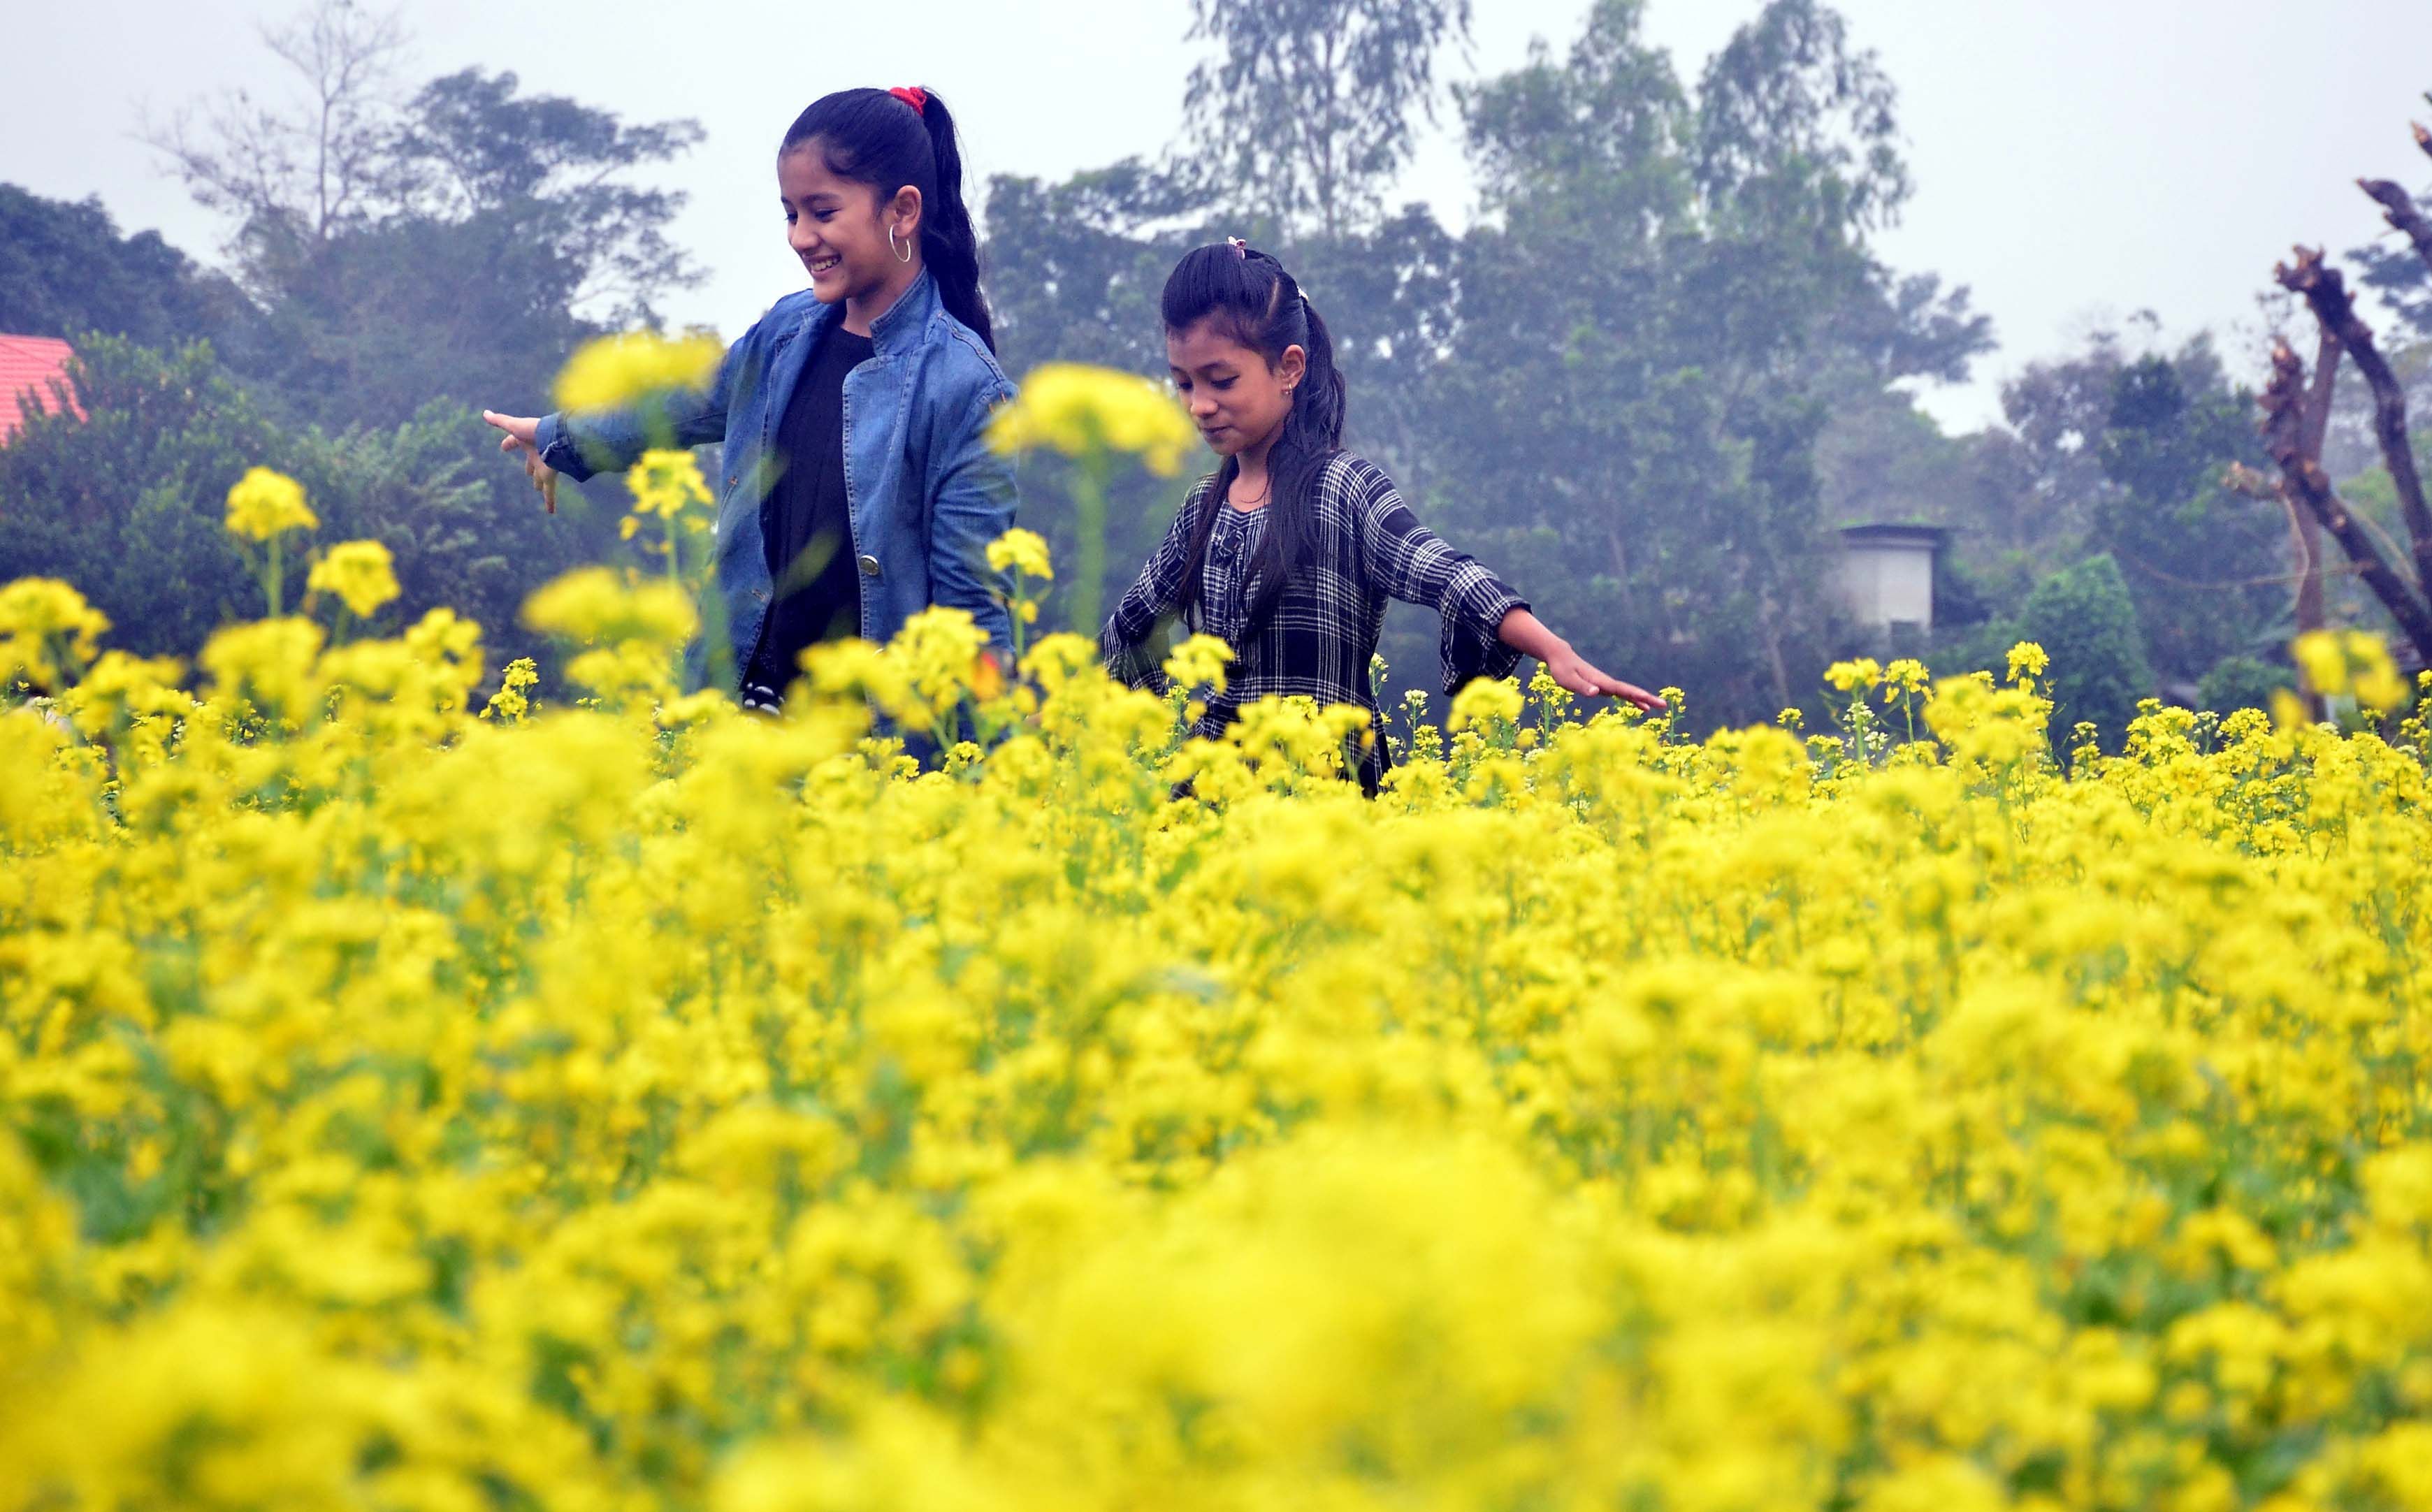 Traveling-lovers are coming from far and wide to see this beautiful view of mustard flowers. Tourists of all ages, from young to old, are busy taking pictures.